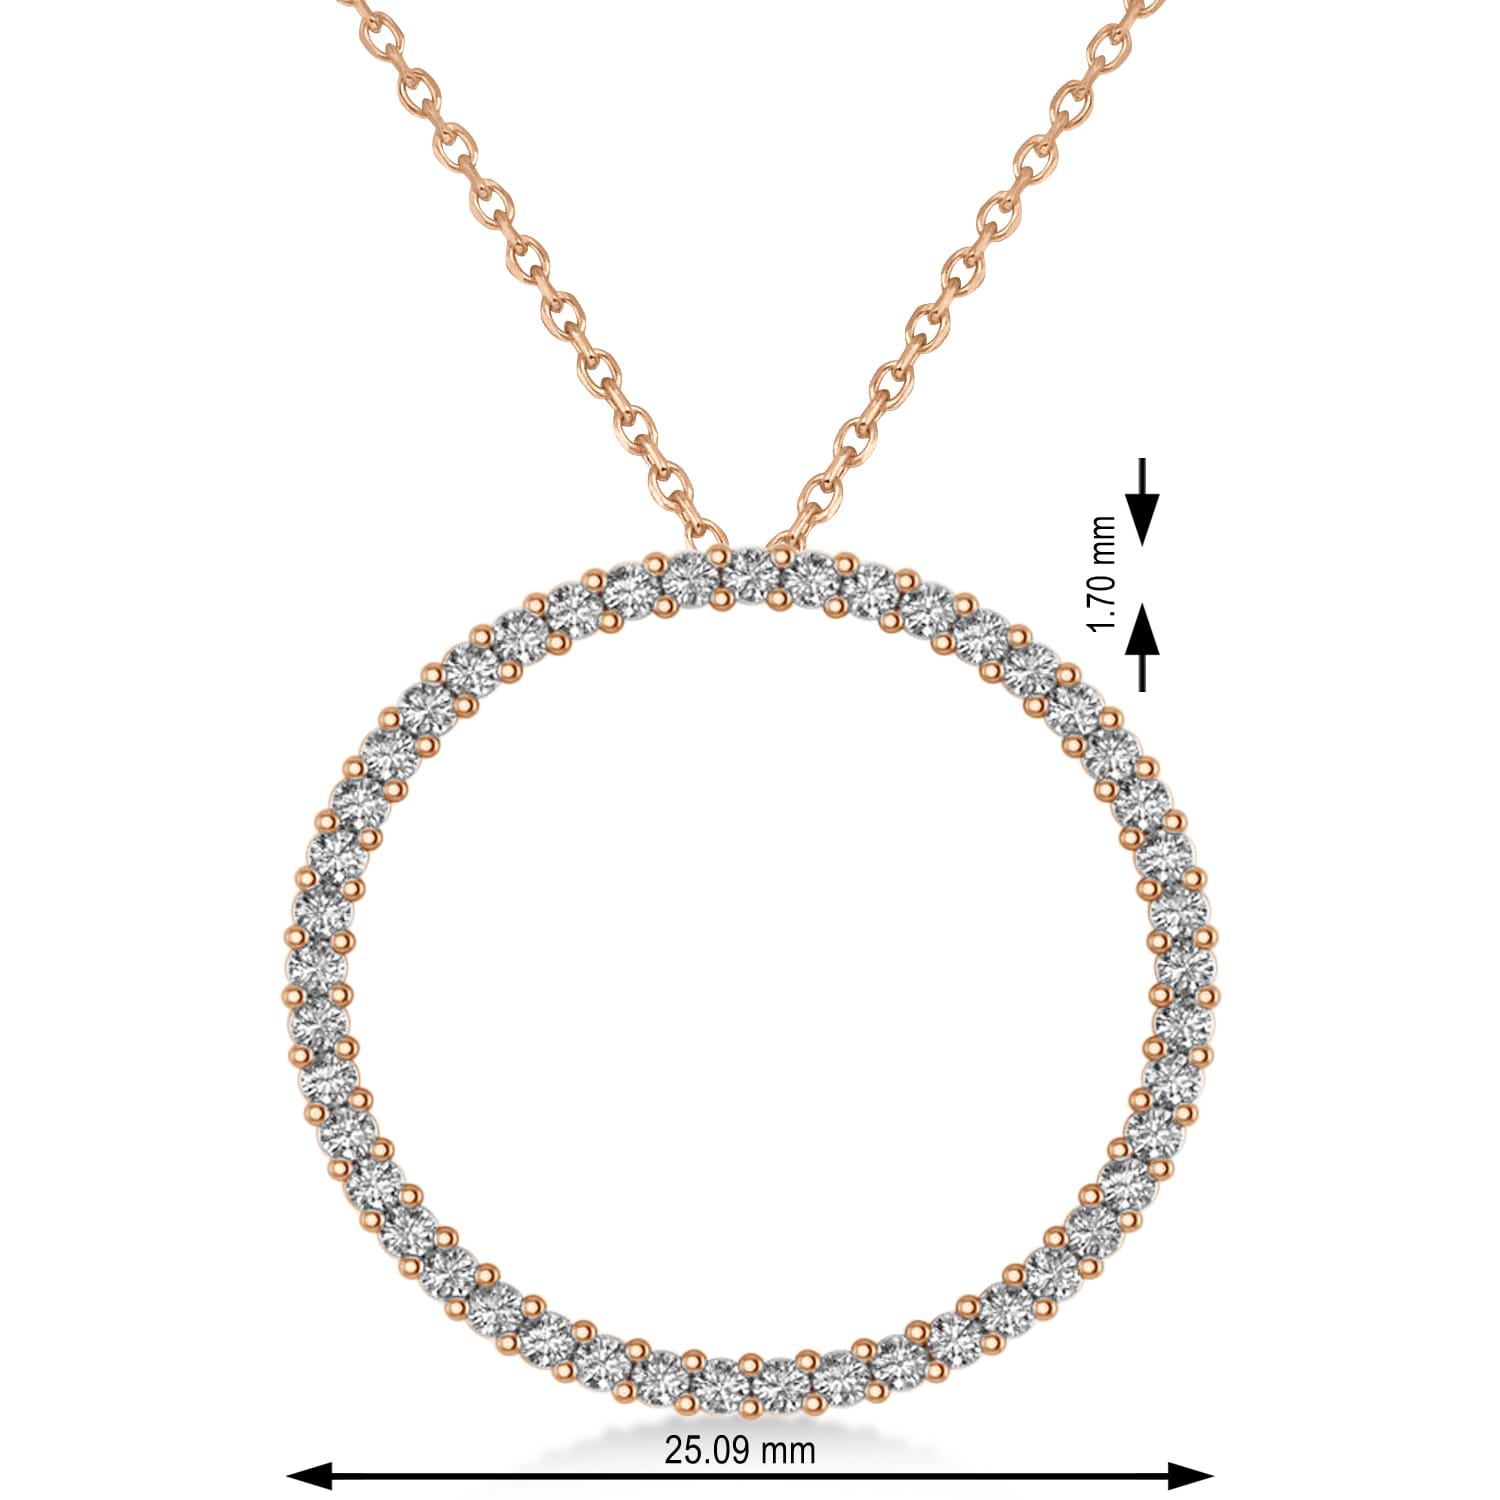 Moissanite Circle of Life Charm Pendant Necklace 14k Rose Gold (0.68ct)